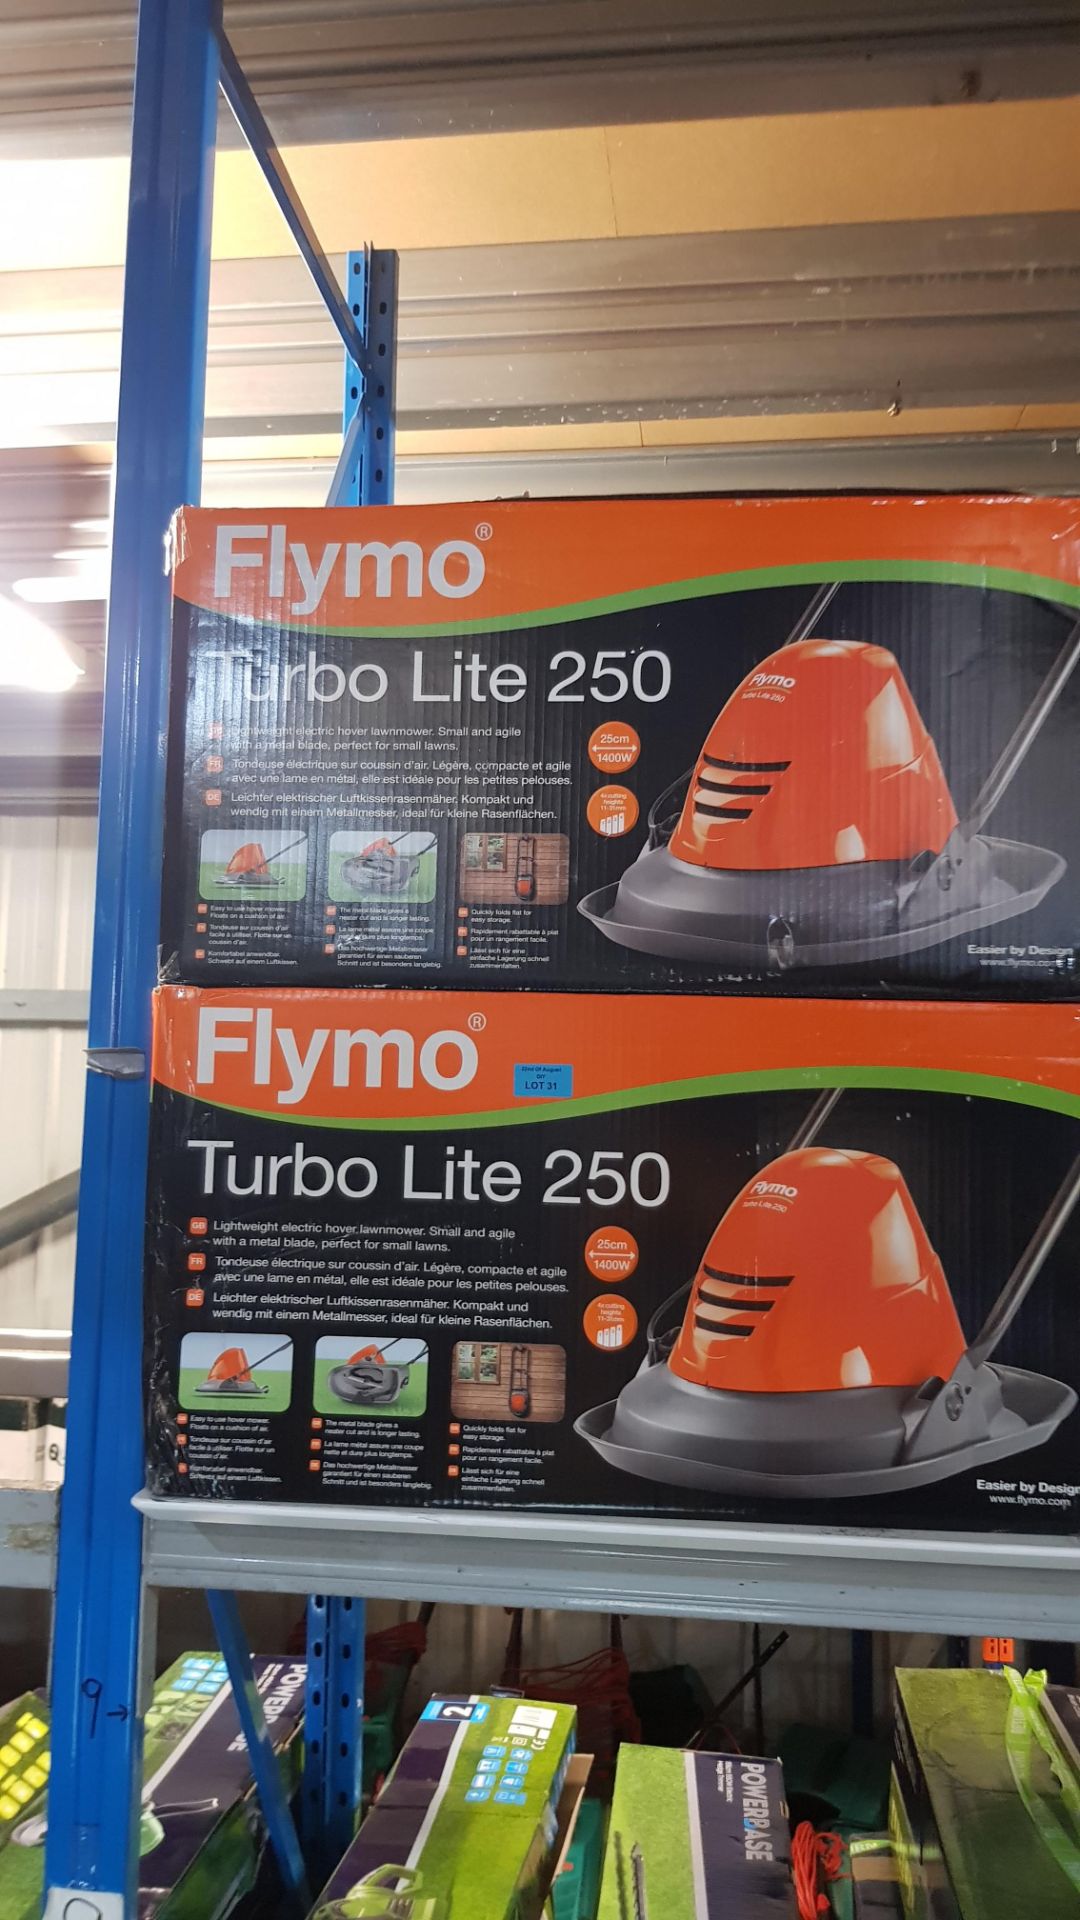 (R11A) 2x Flymo Turbo Lite 250 Electric Hover Lawnmower RRP £69 Each. - Image 3 of 3